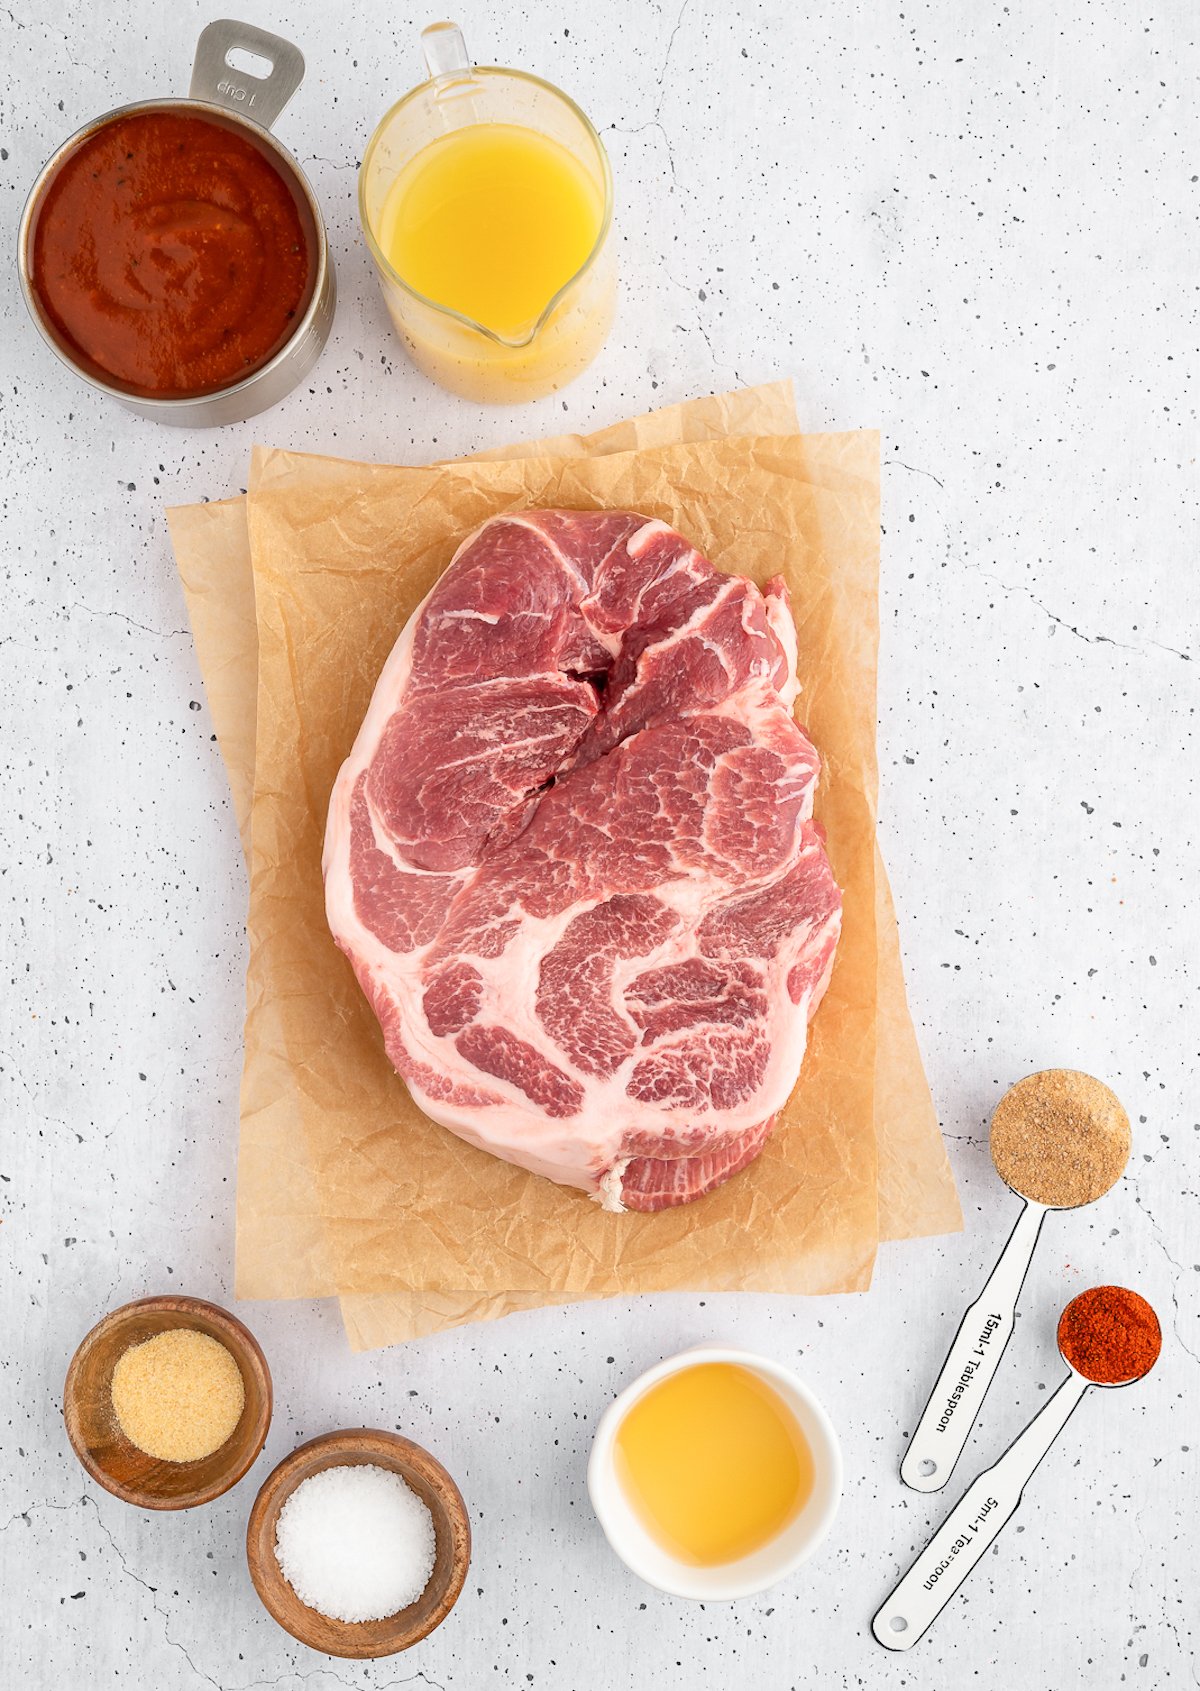 Overhead view of the raw ingredients needed to make Instant Pot pork butt.